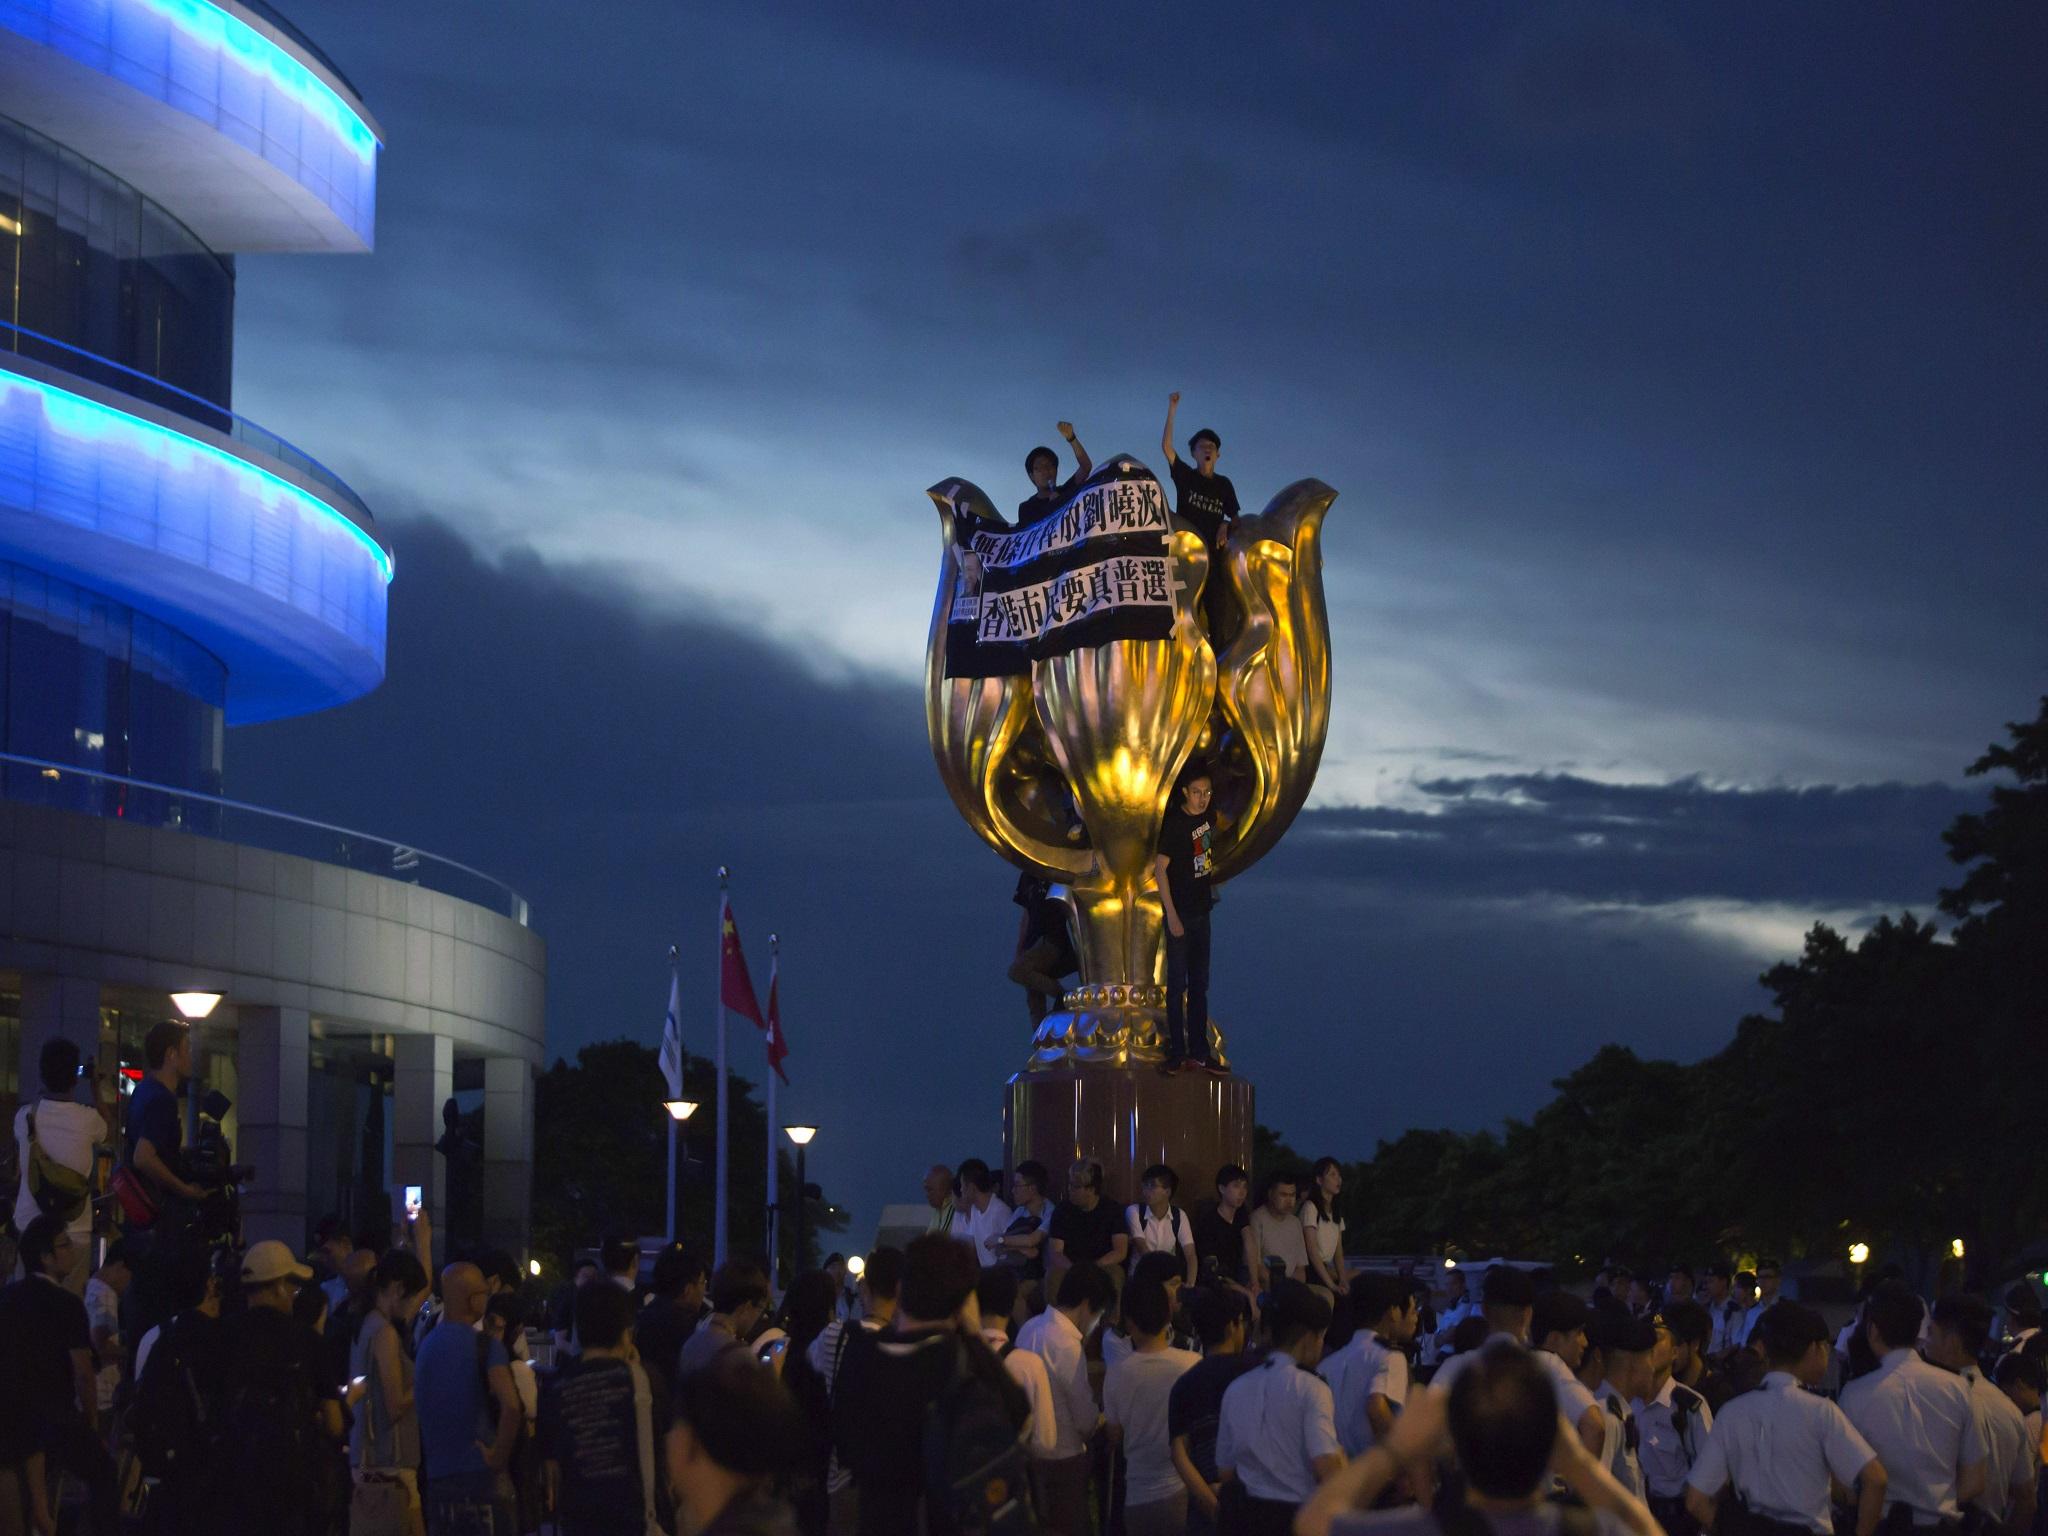 Pro-democracy activists invade the Golden Bauhinia statue in Hong Kong